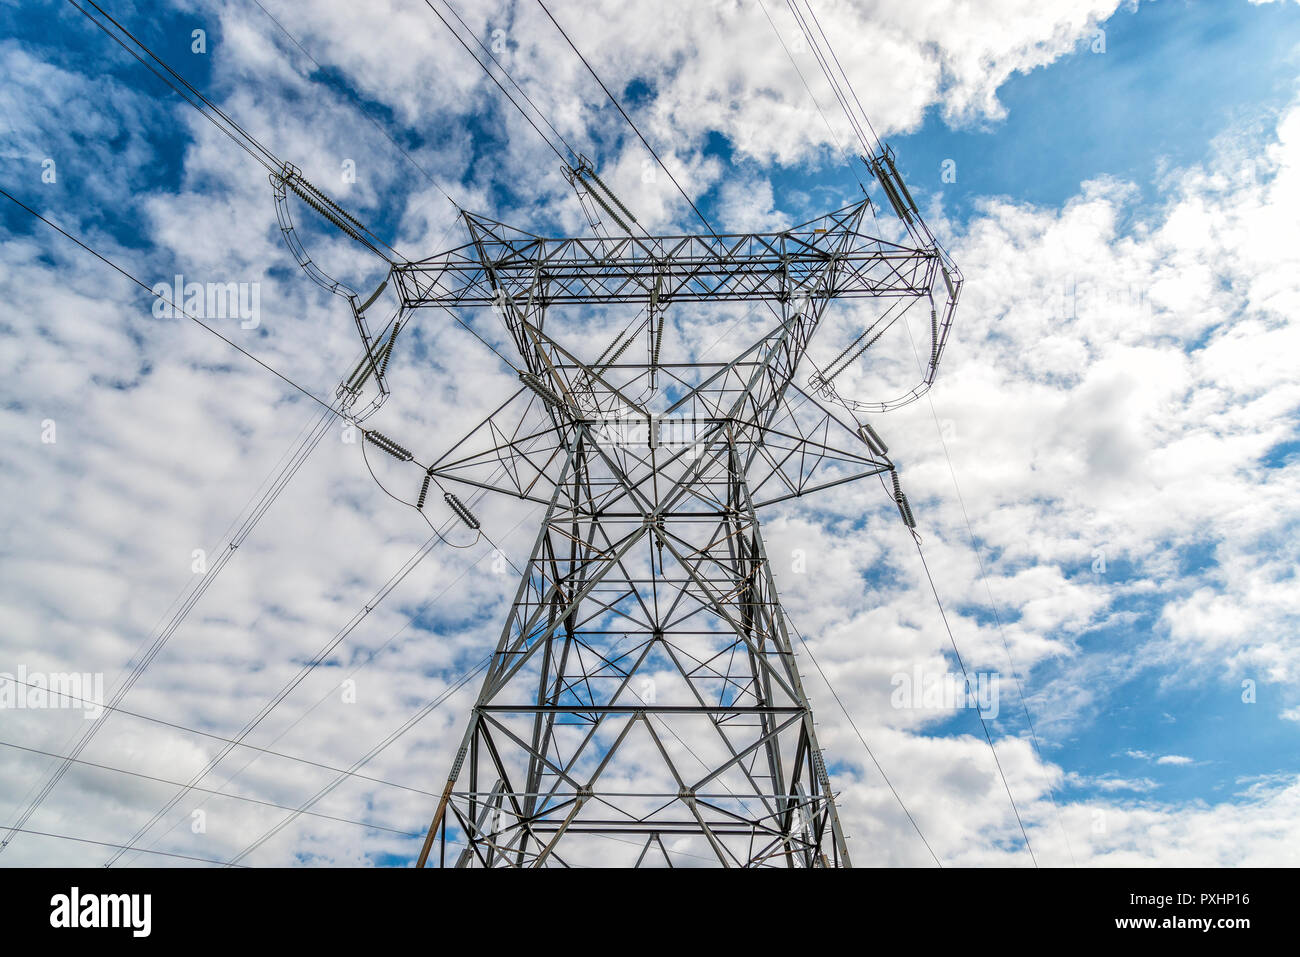 Horizontal shot of a High Voltage Tower and Power Lines under cloudy skies. Stock Photo